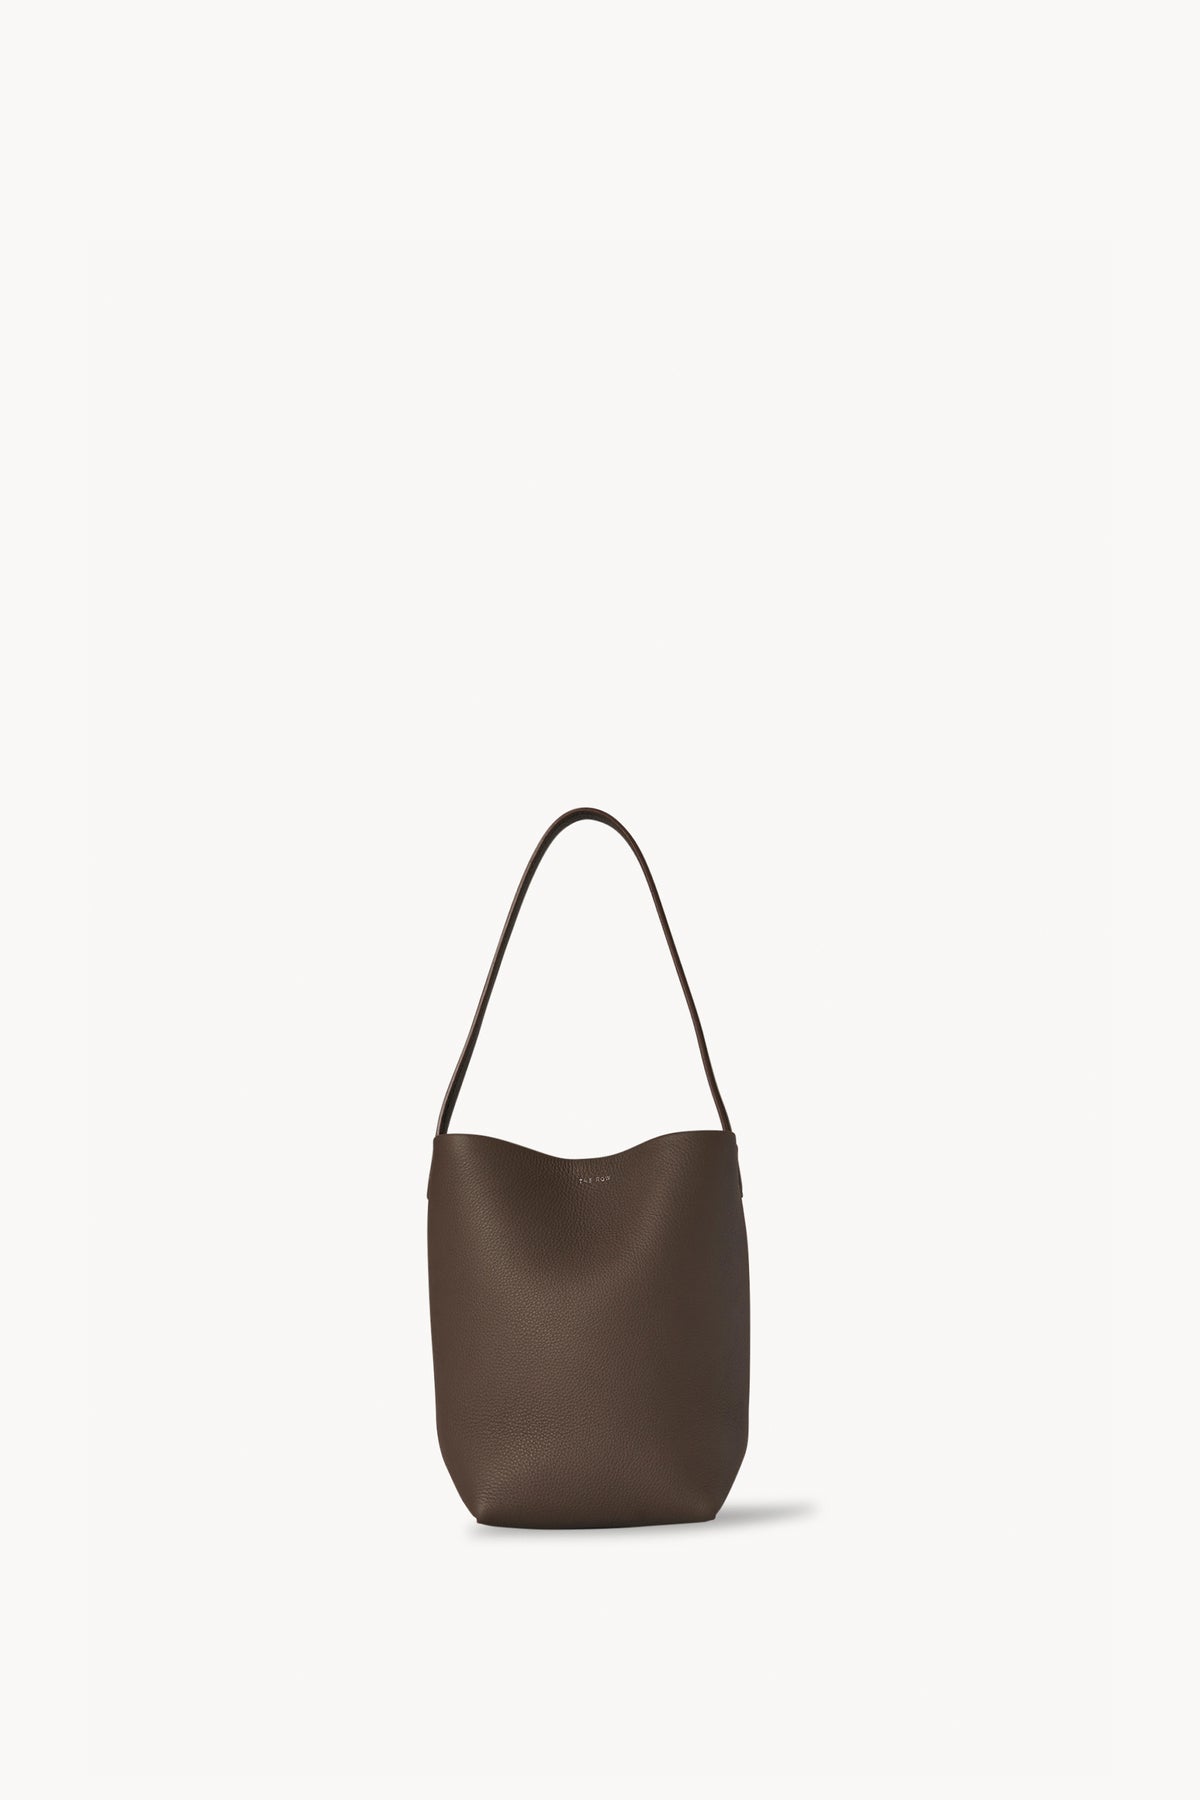 The Row park tote